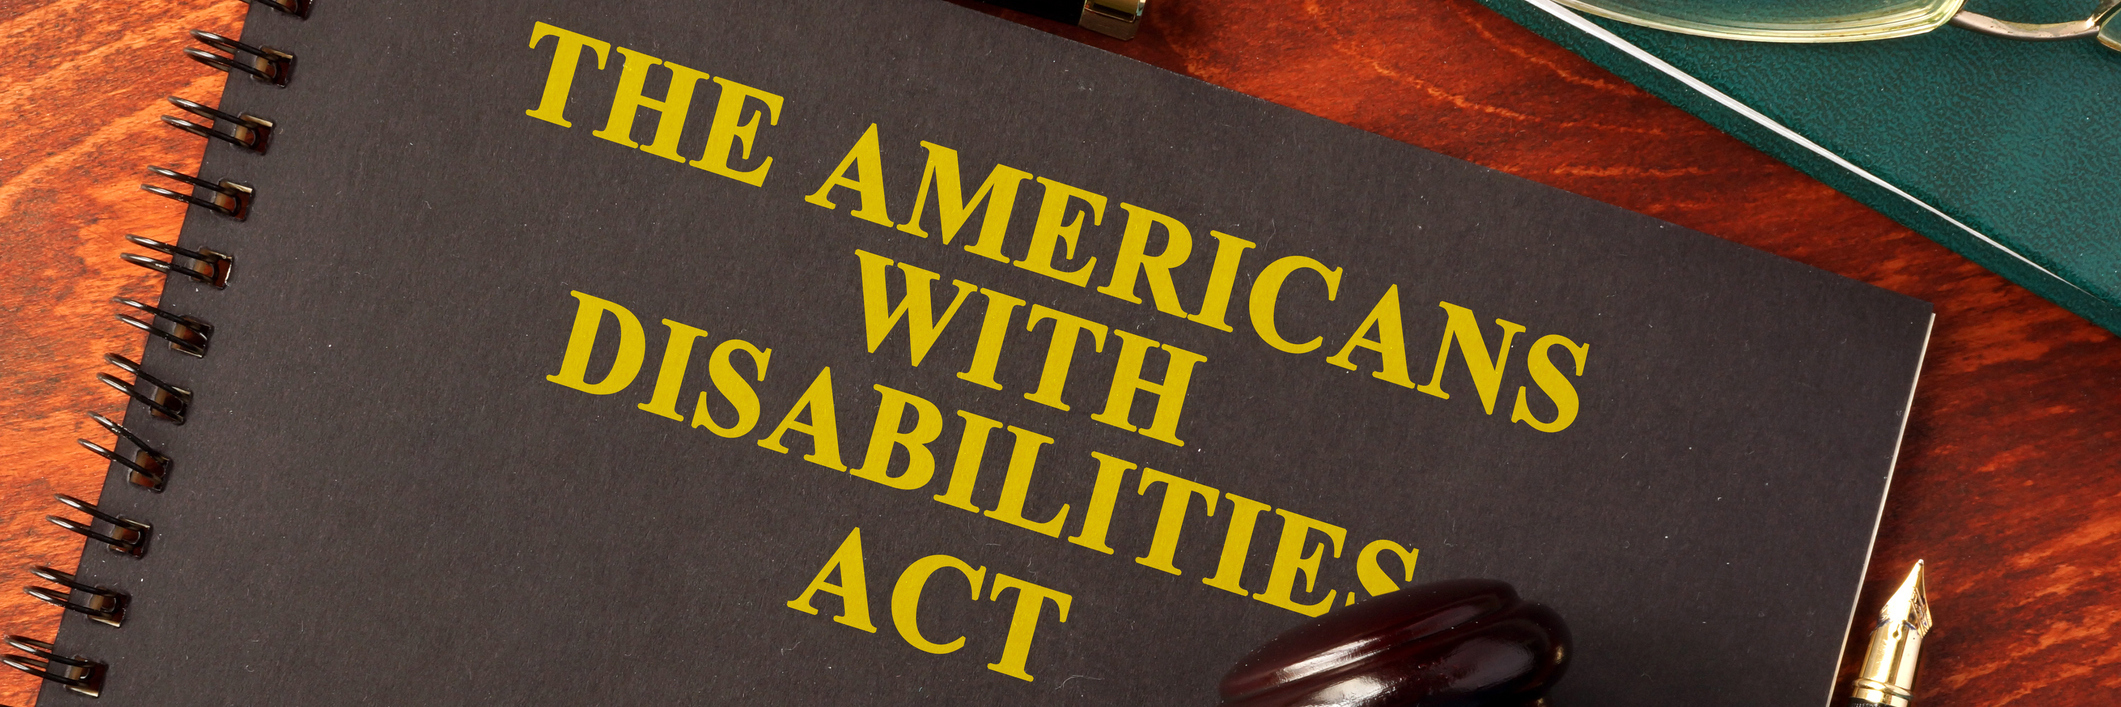 Americans With Disabilities Act (ADA) notebook and gavel.